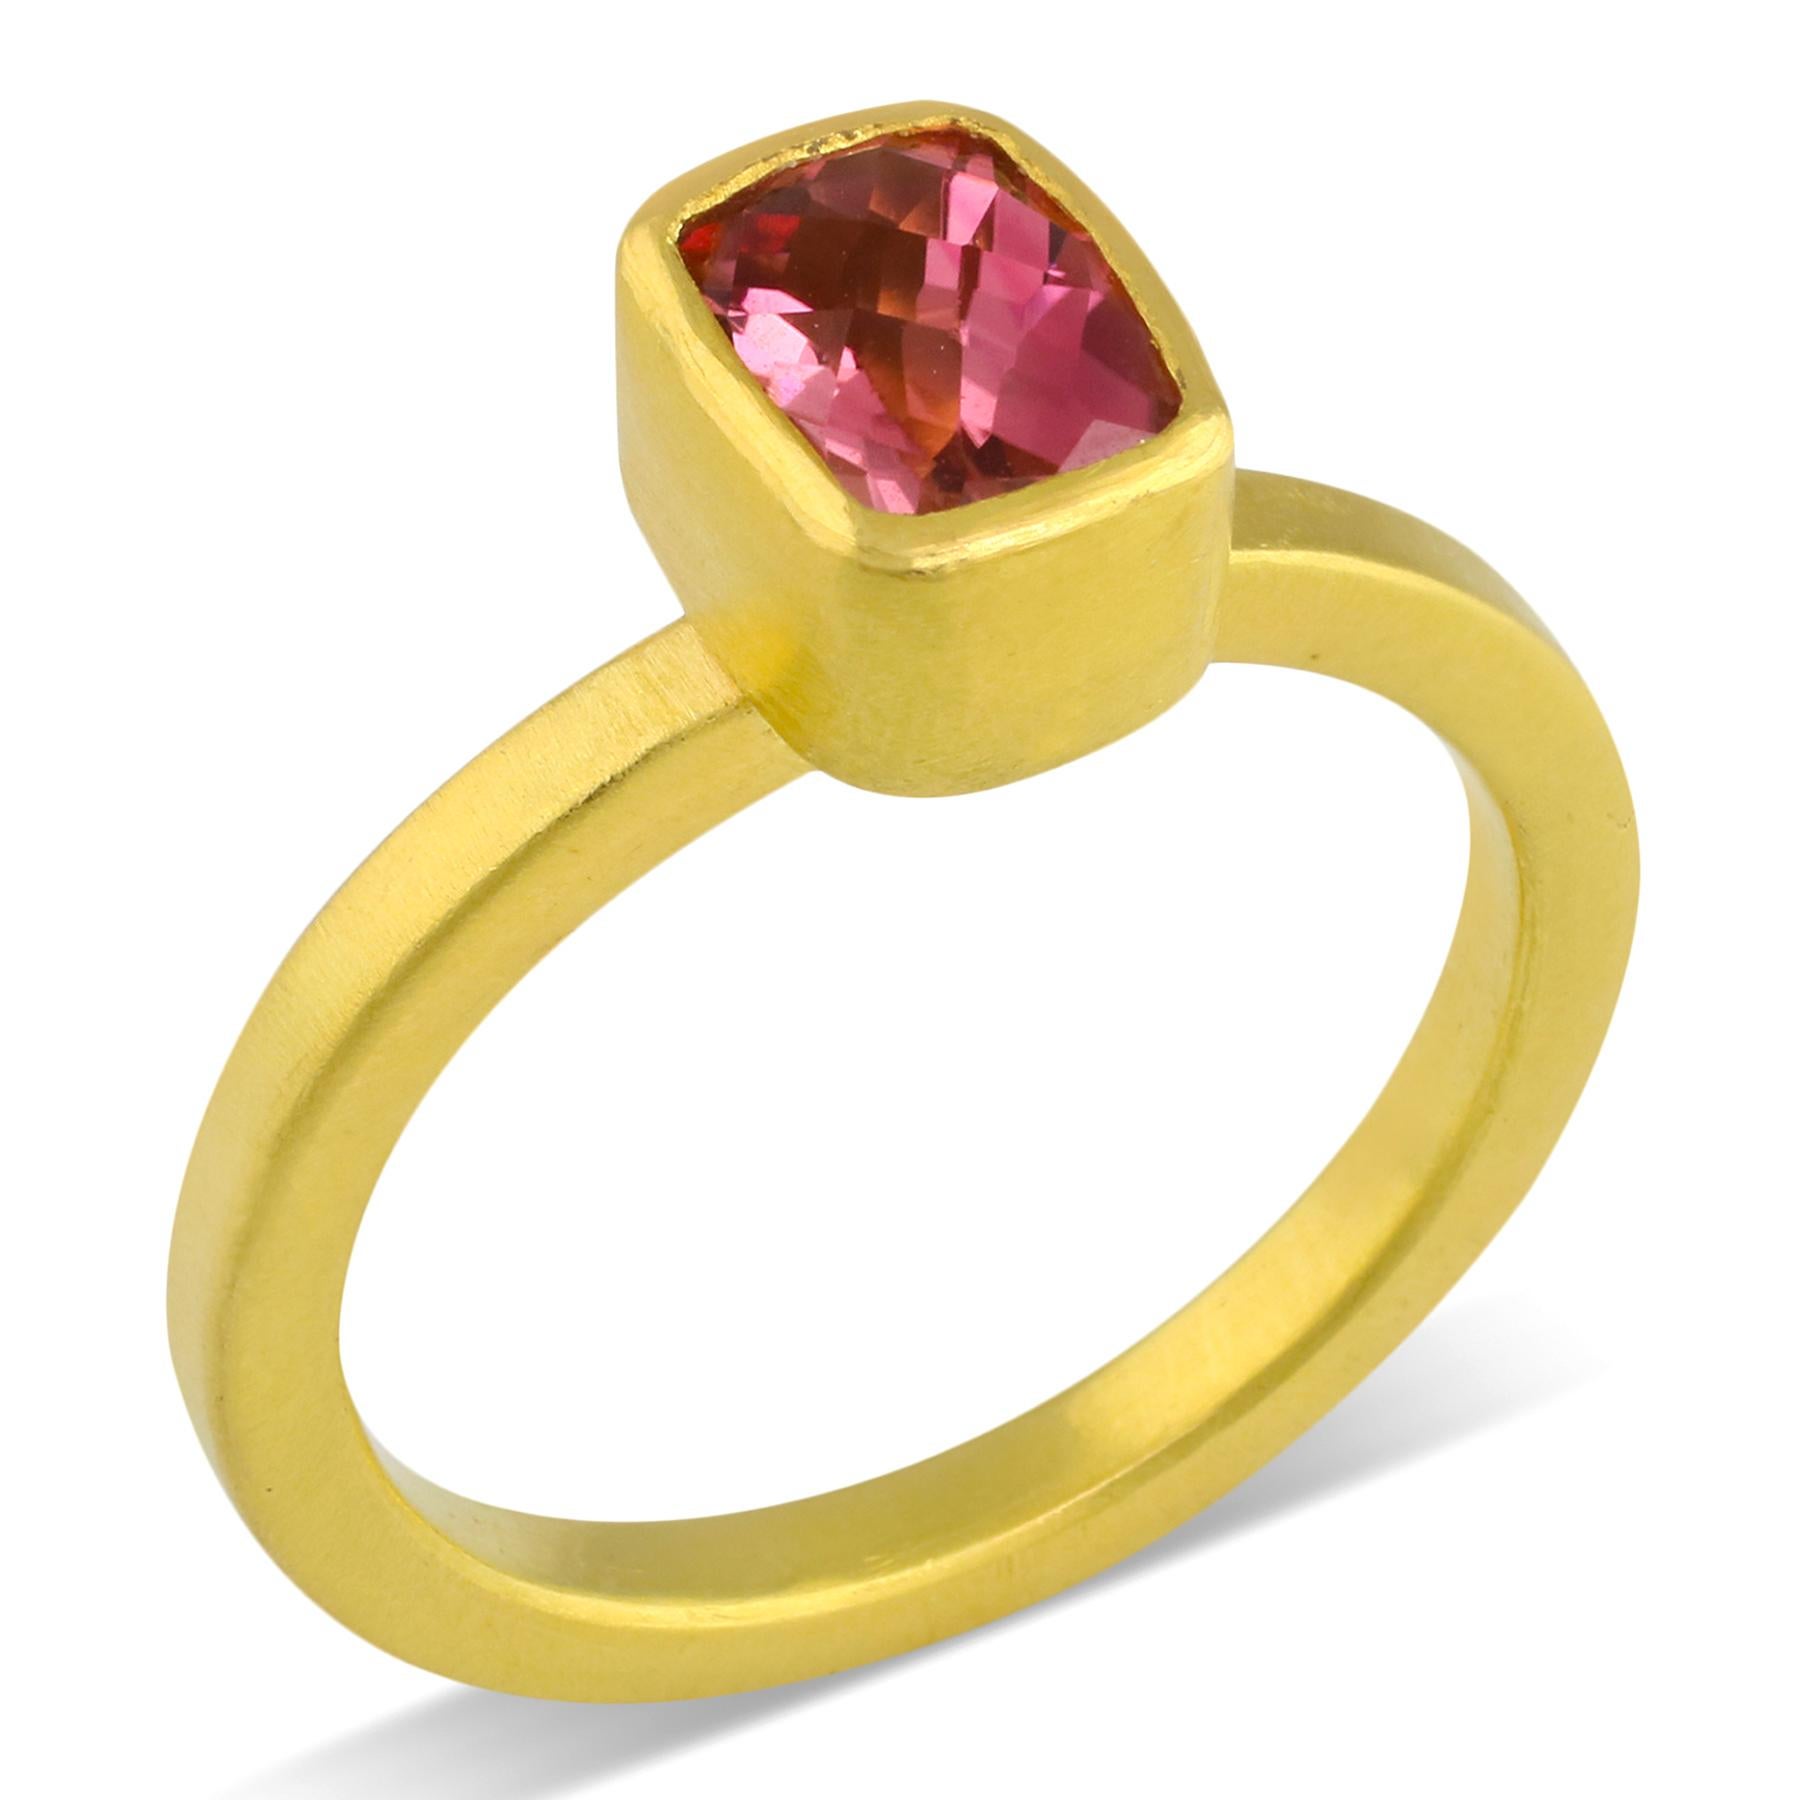 PHILIPPE-SPENCER -  1.08 Ct. Cushion Cut Rose Tourmaline wrapped in 22K Gold Bezel Setting, with Anvil-Forged Solid 20K Gold 2.25mm x 2mm Band. Heavy Brushed Exterior, Mirror Polish Interior.  Size 6 1/2, and is in-stock and ready to ship. Our